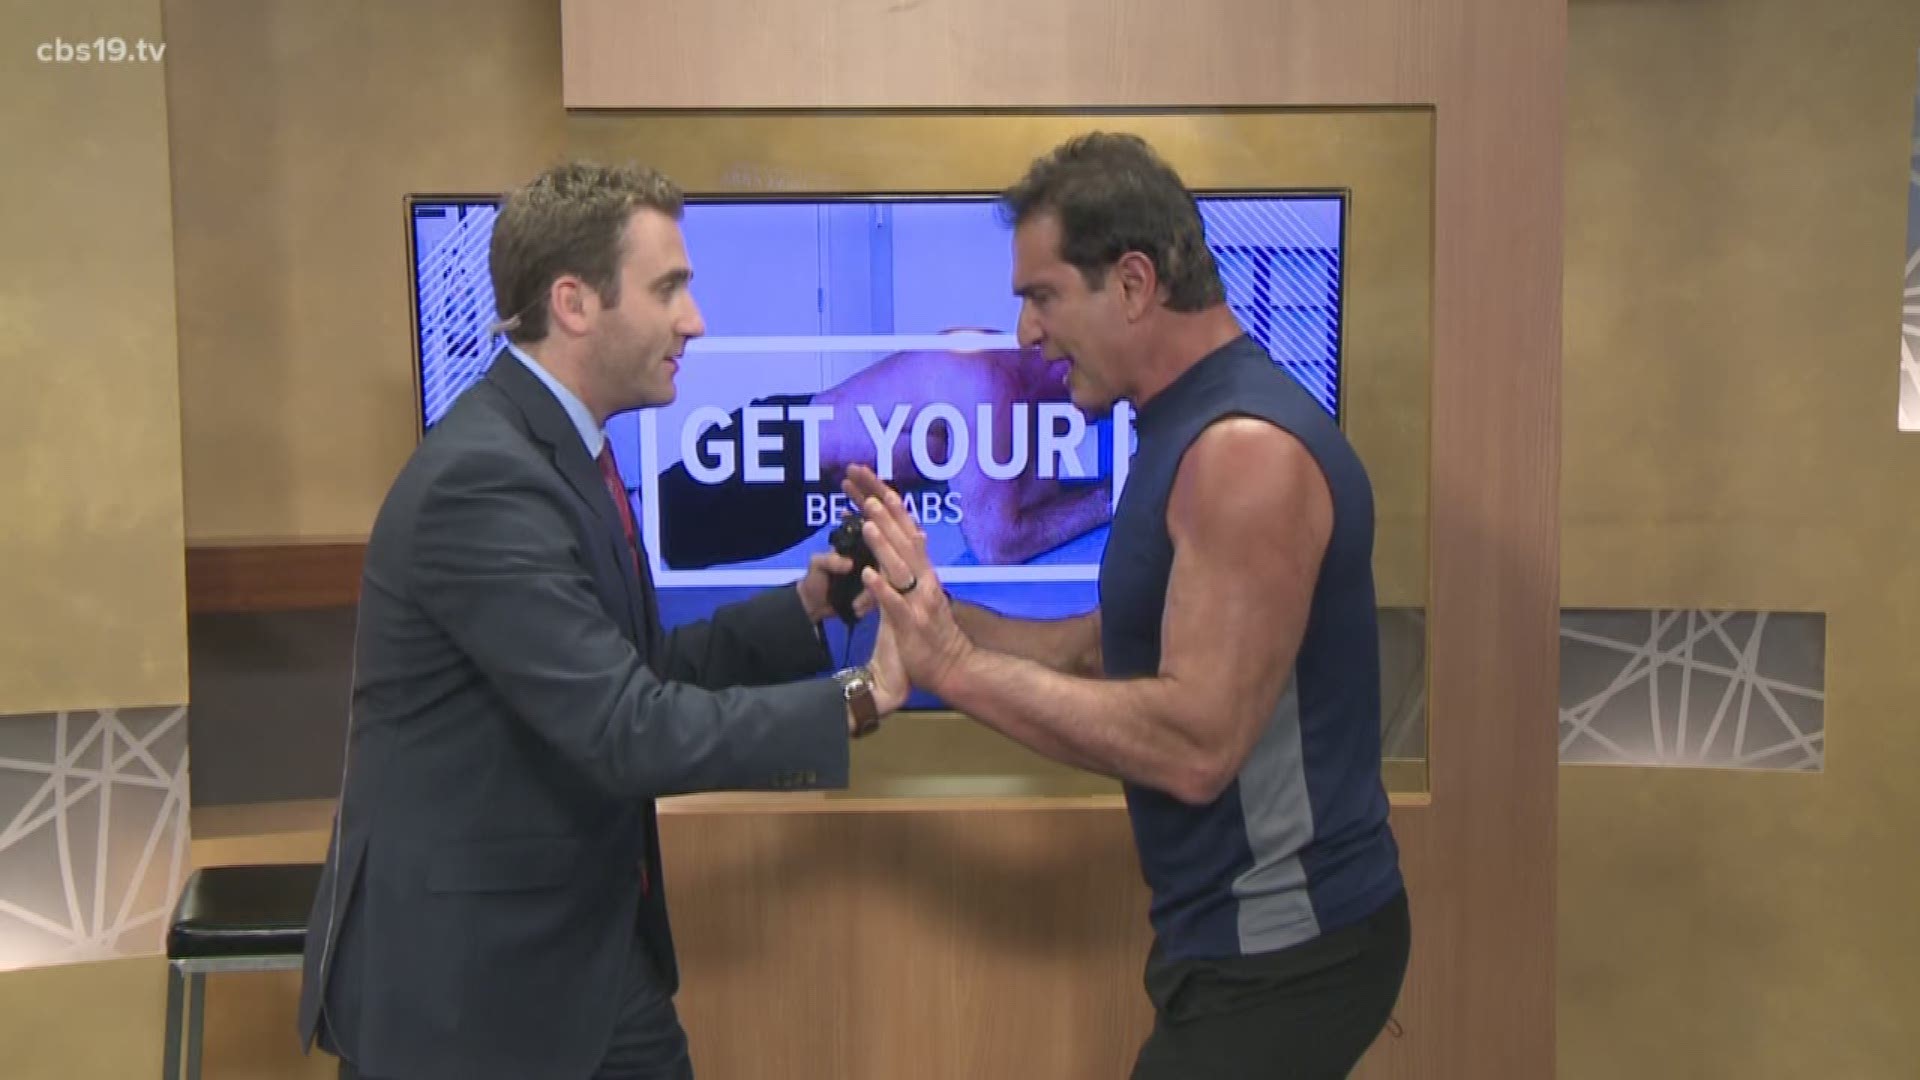 19now: Tom Seabourne Ph.D., the author of "Your Best Abs," joins Mike to discuss how you can get your best abs.